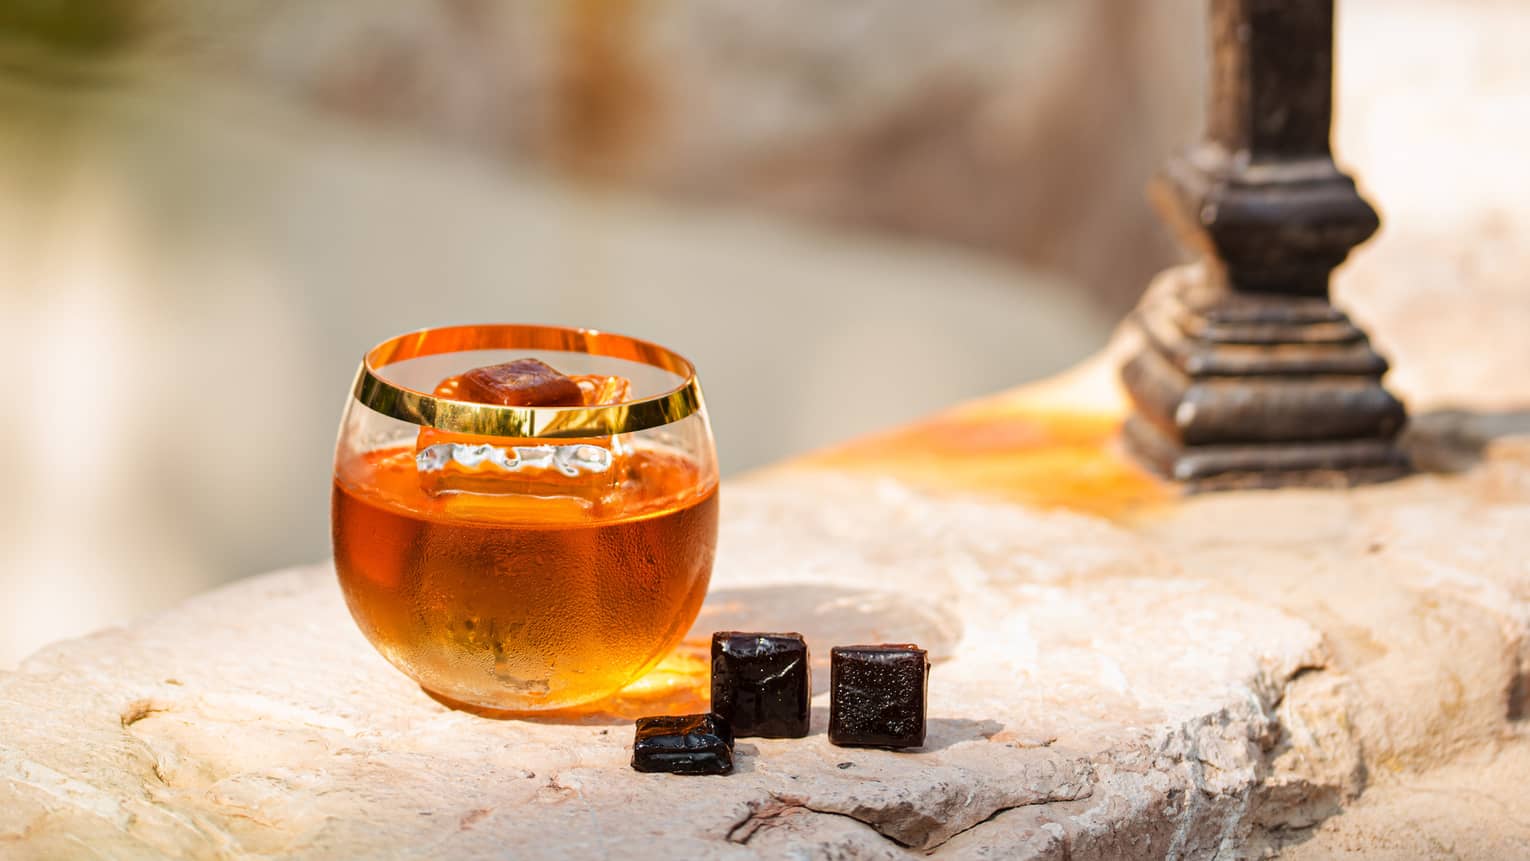 A glass of amber coloured alcohol on a stone wall.